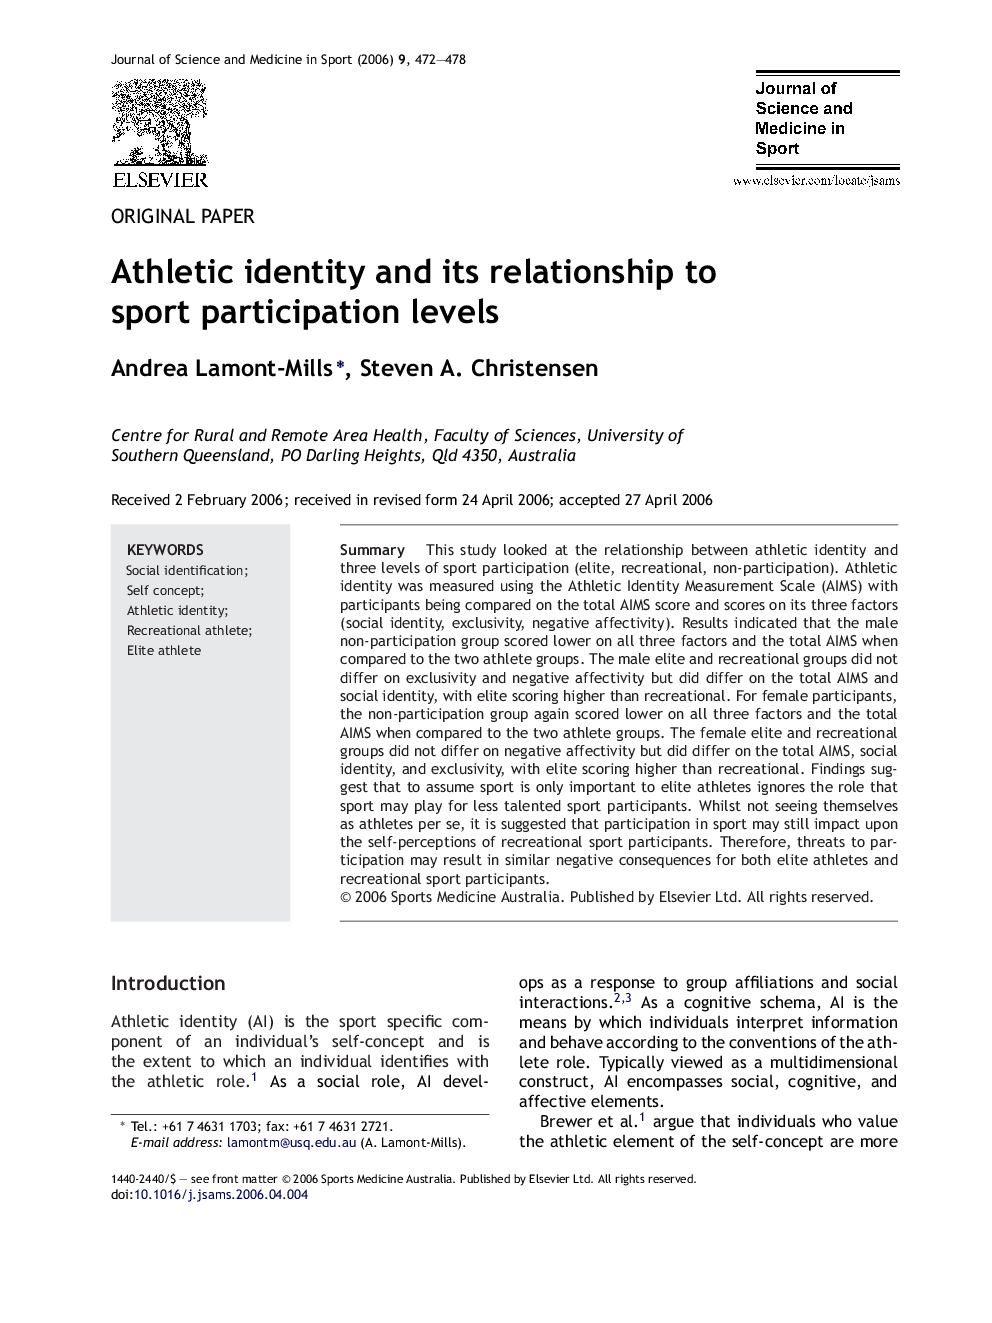 Athletic identity and its relationship to sport participation levels